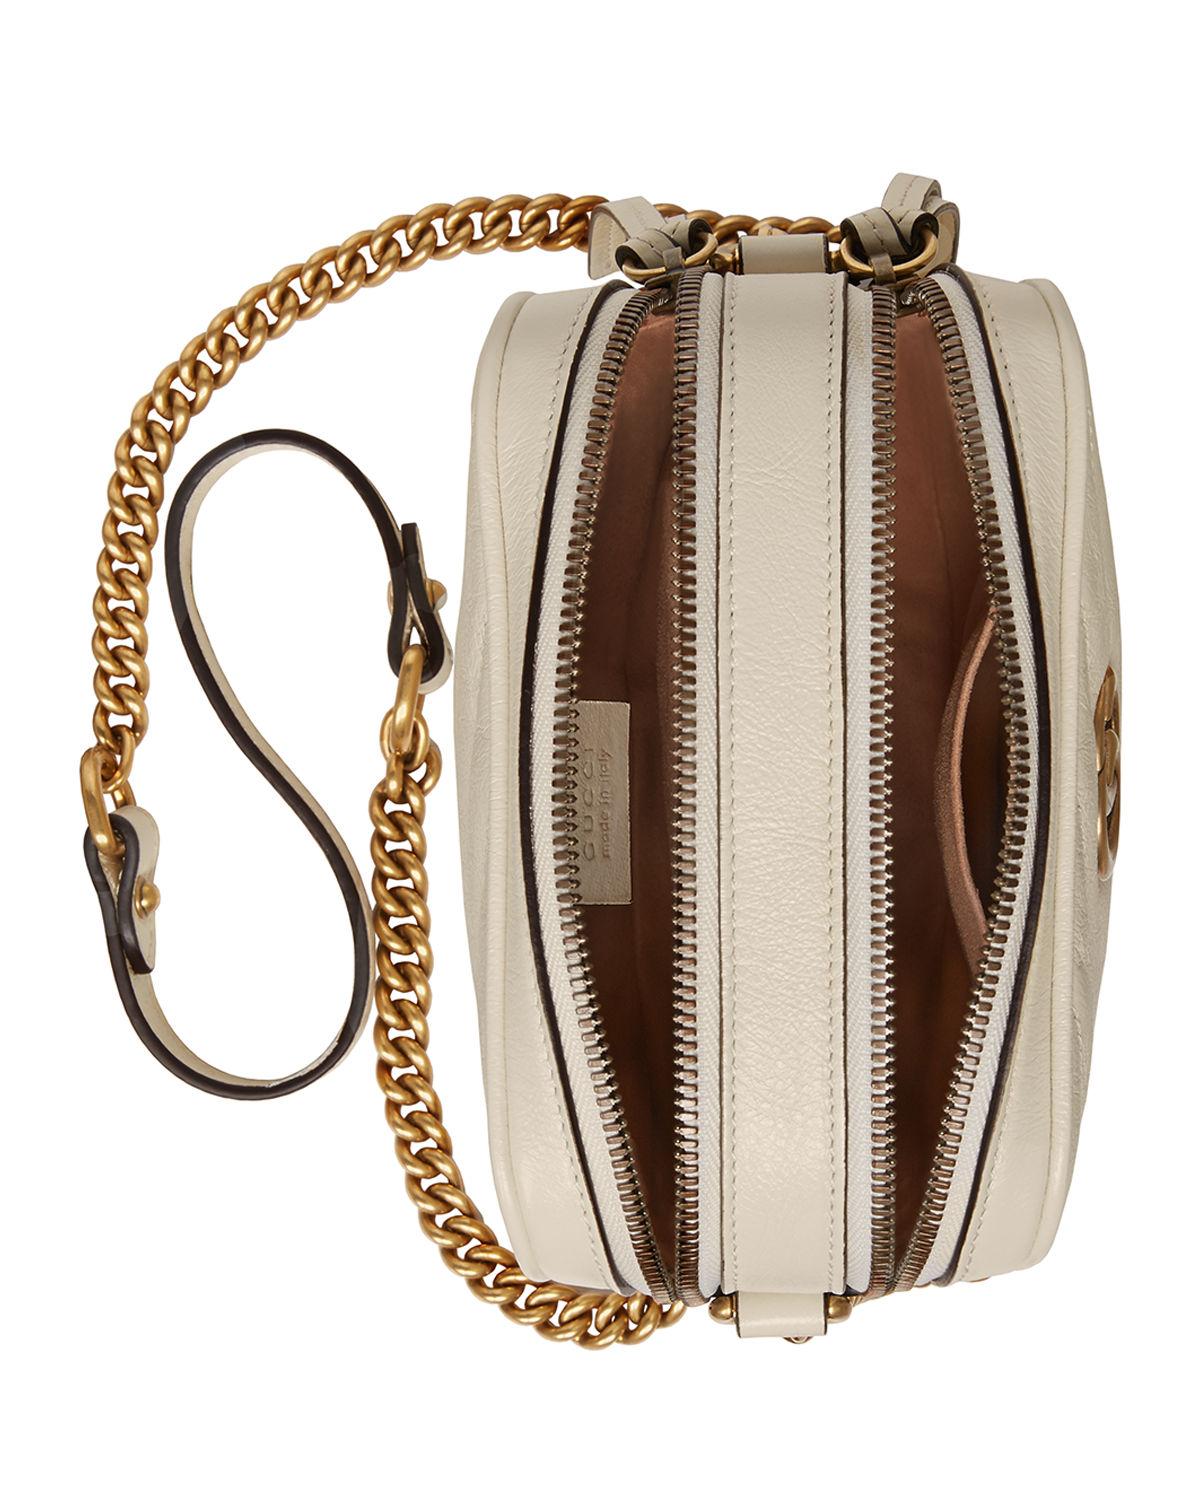 Gucci GG Marmont Tall Chevron Leather Crossbody Bag in White - Lyst